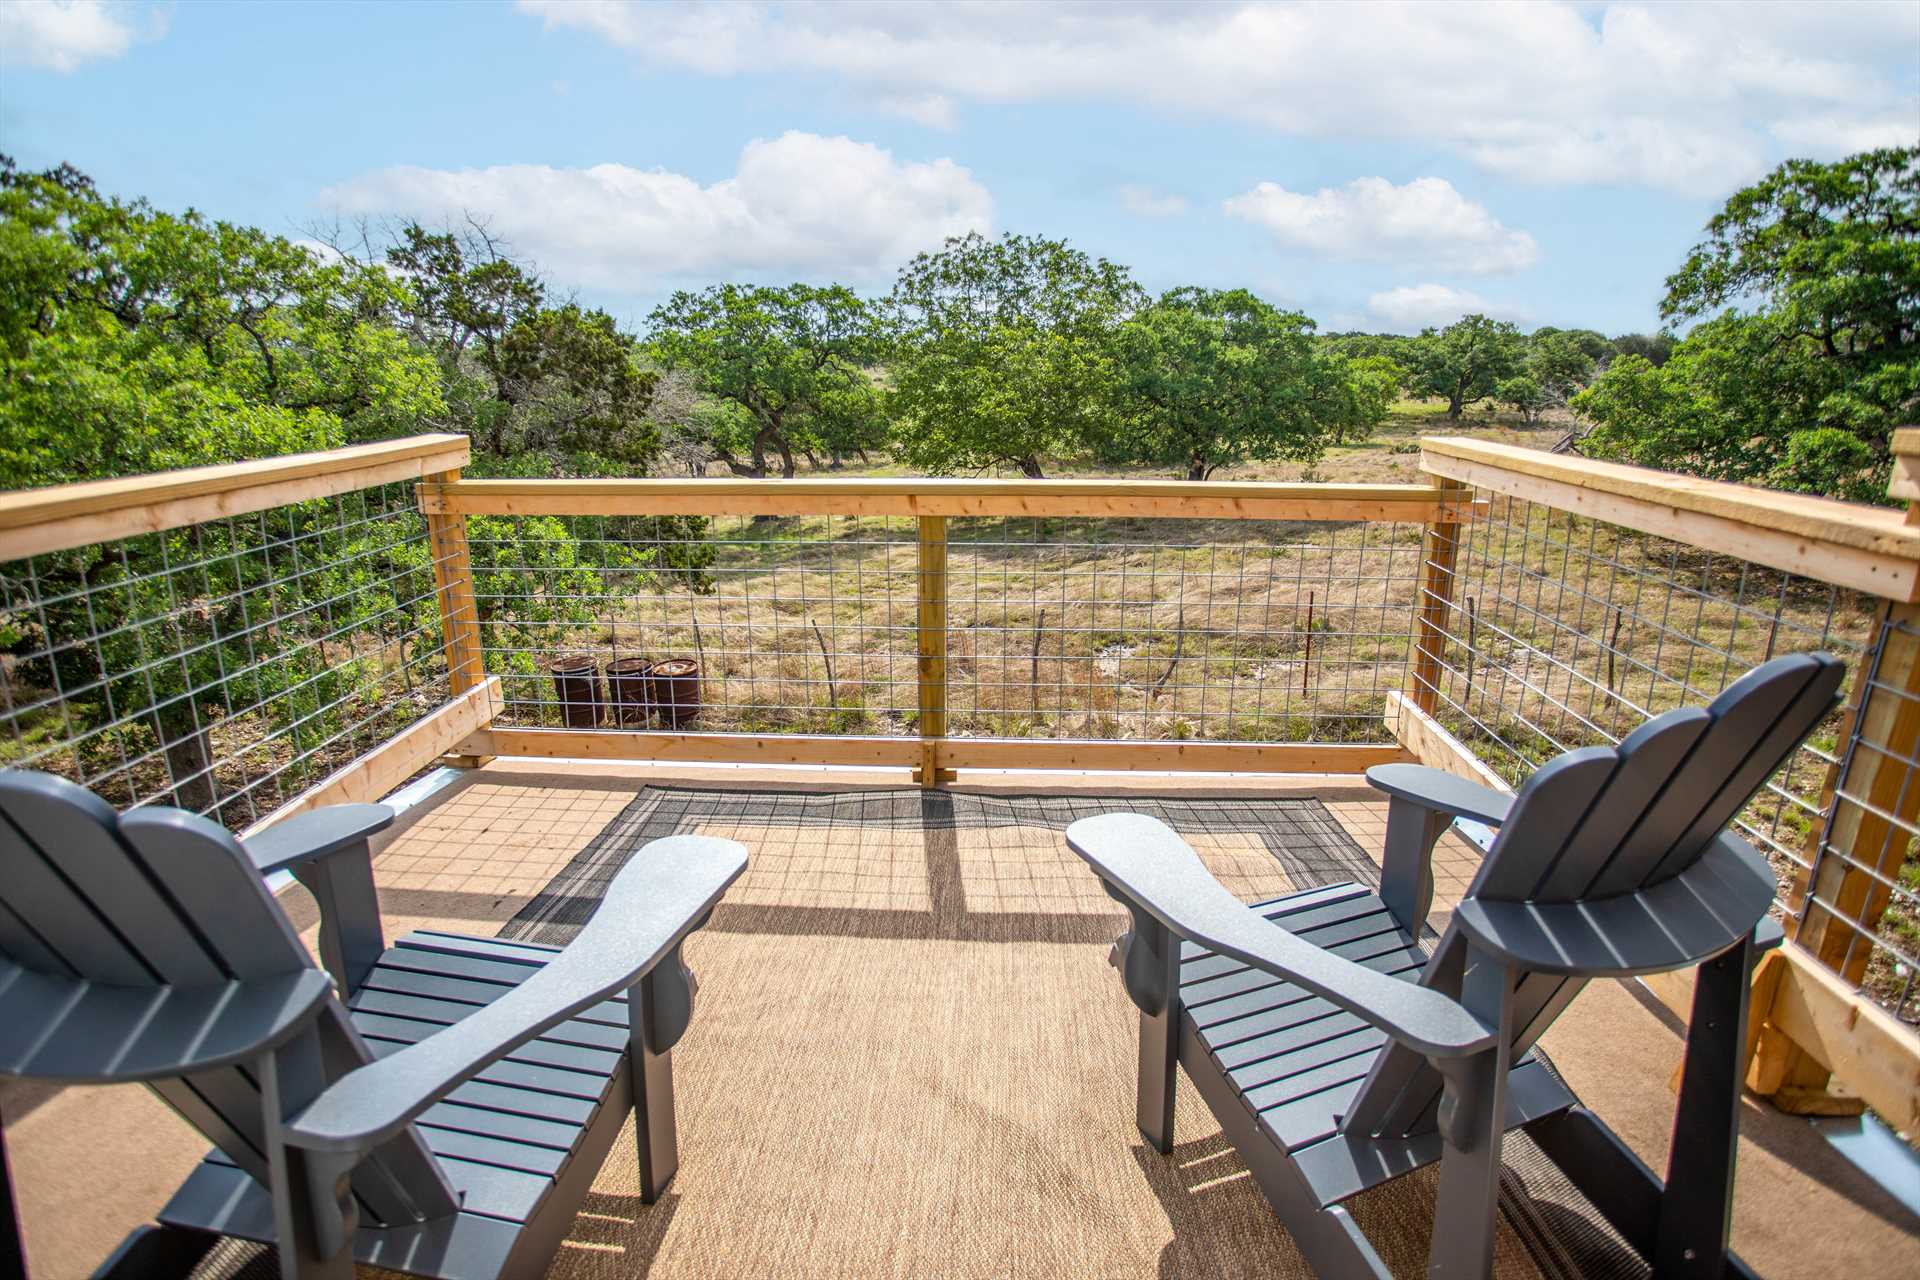                                                 Take in the full majesty of the Hill Country from the elevated deck! At night, you'll enjoy stargazing at its best.